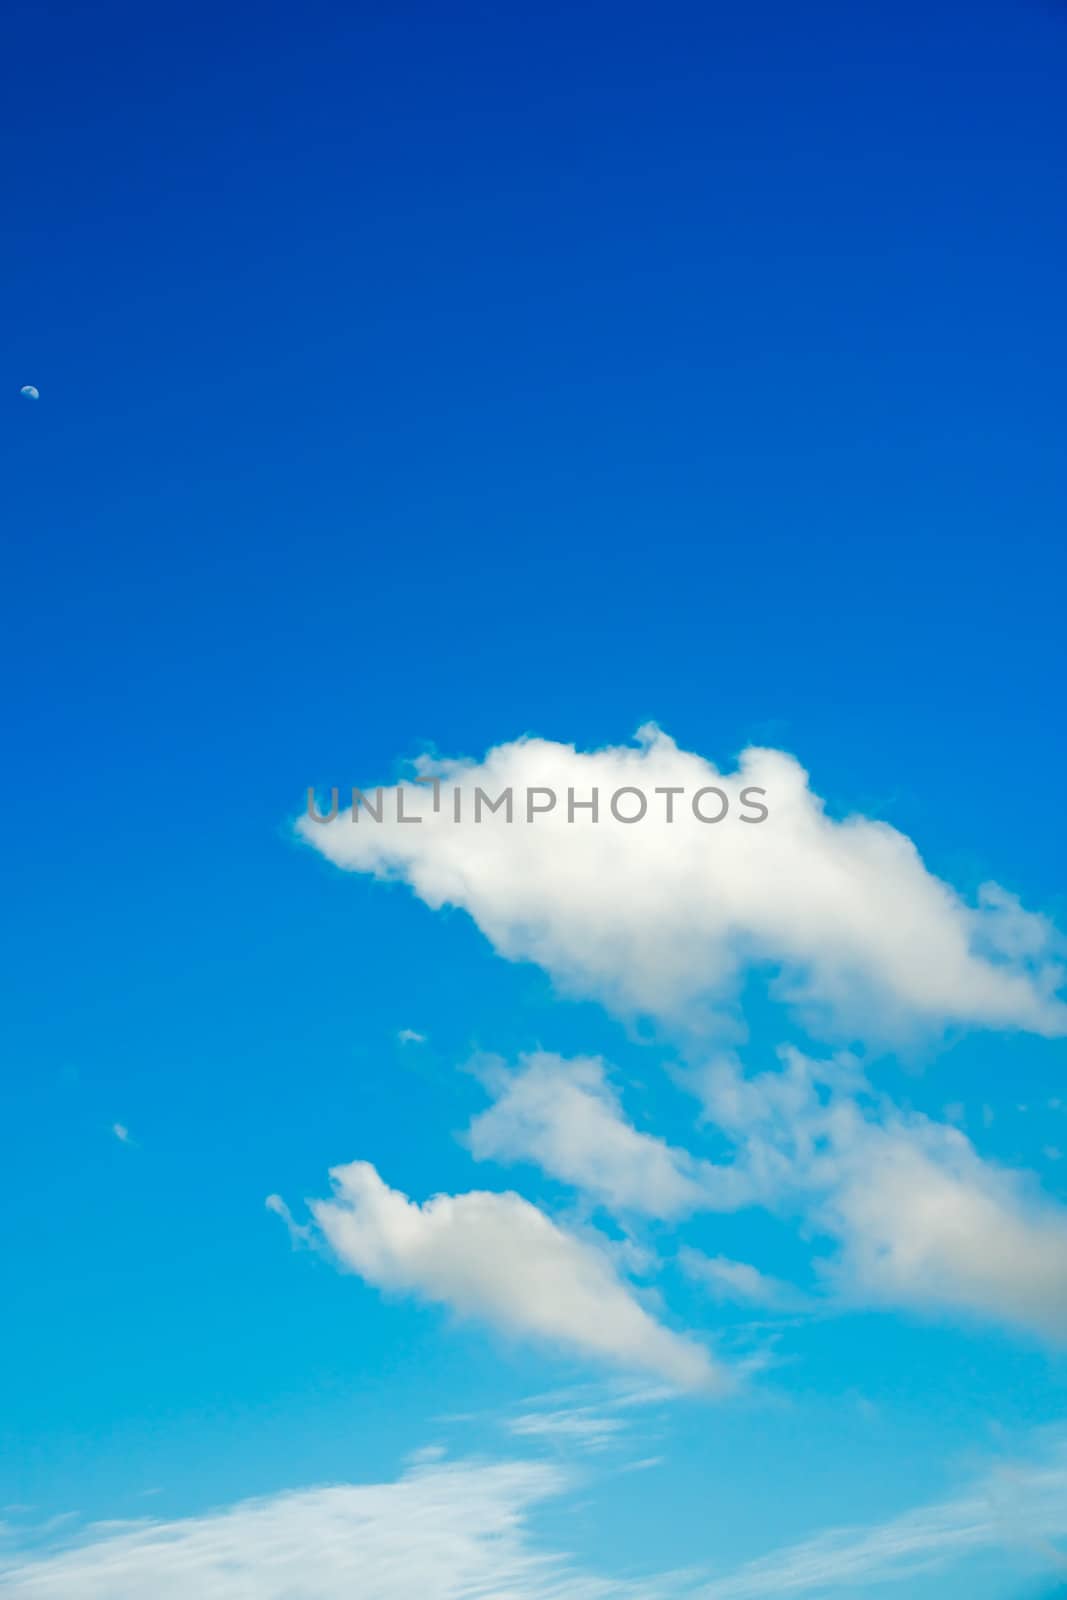 The beautiful white clouds and blue sky